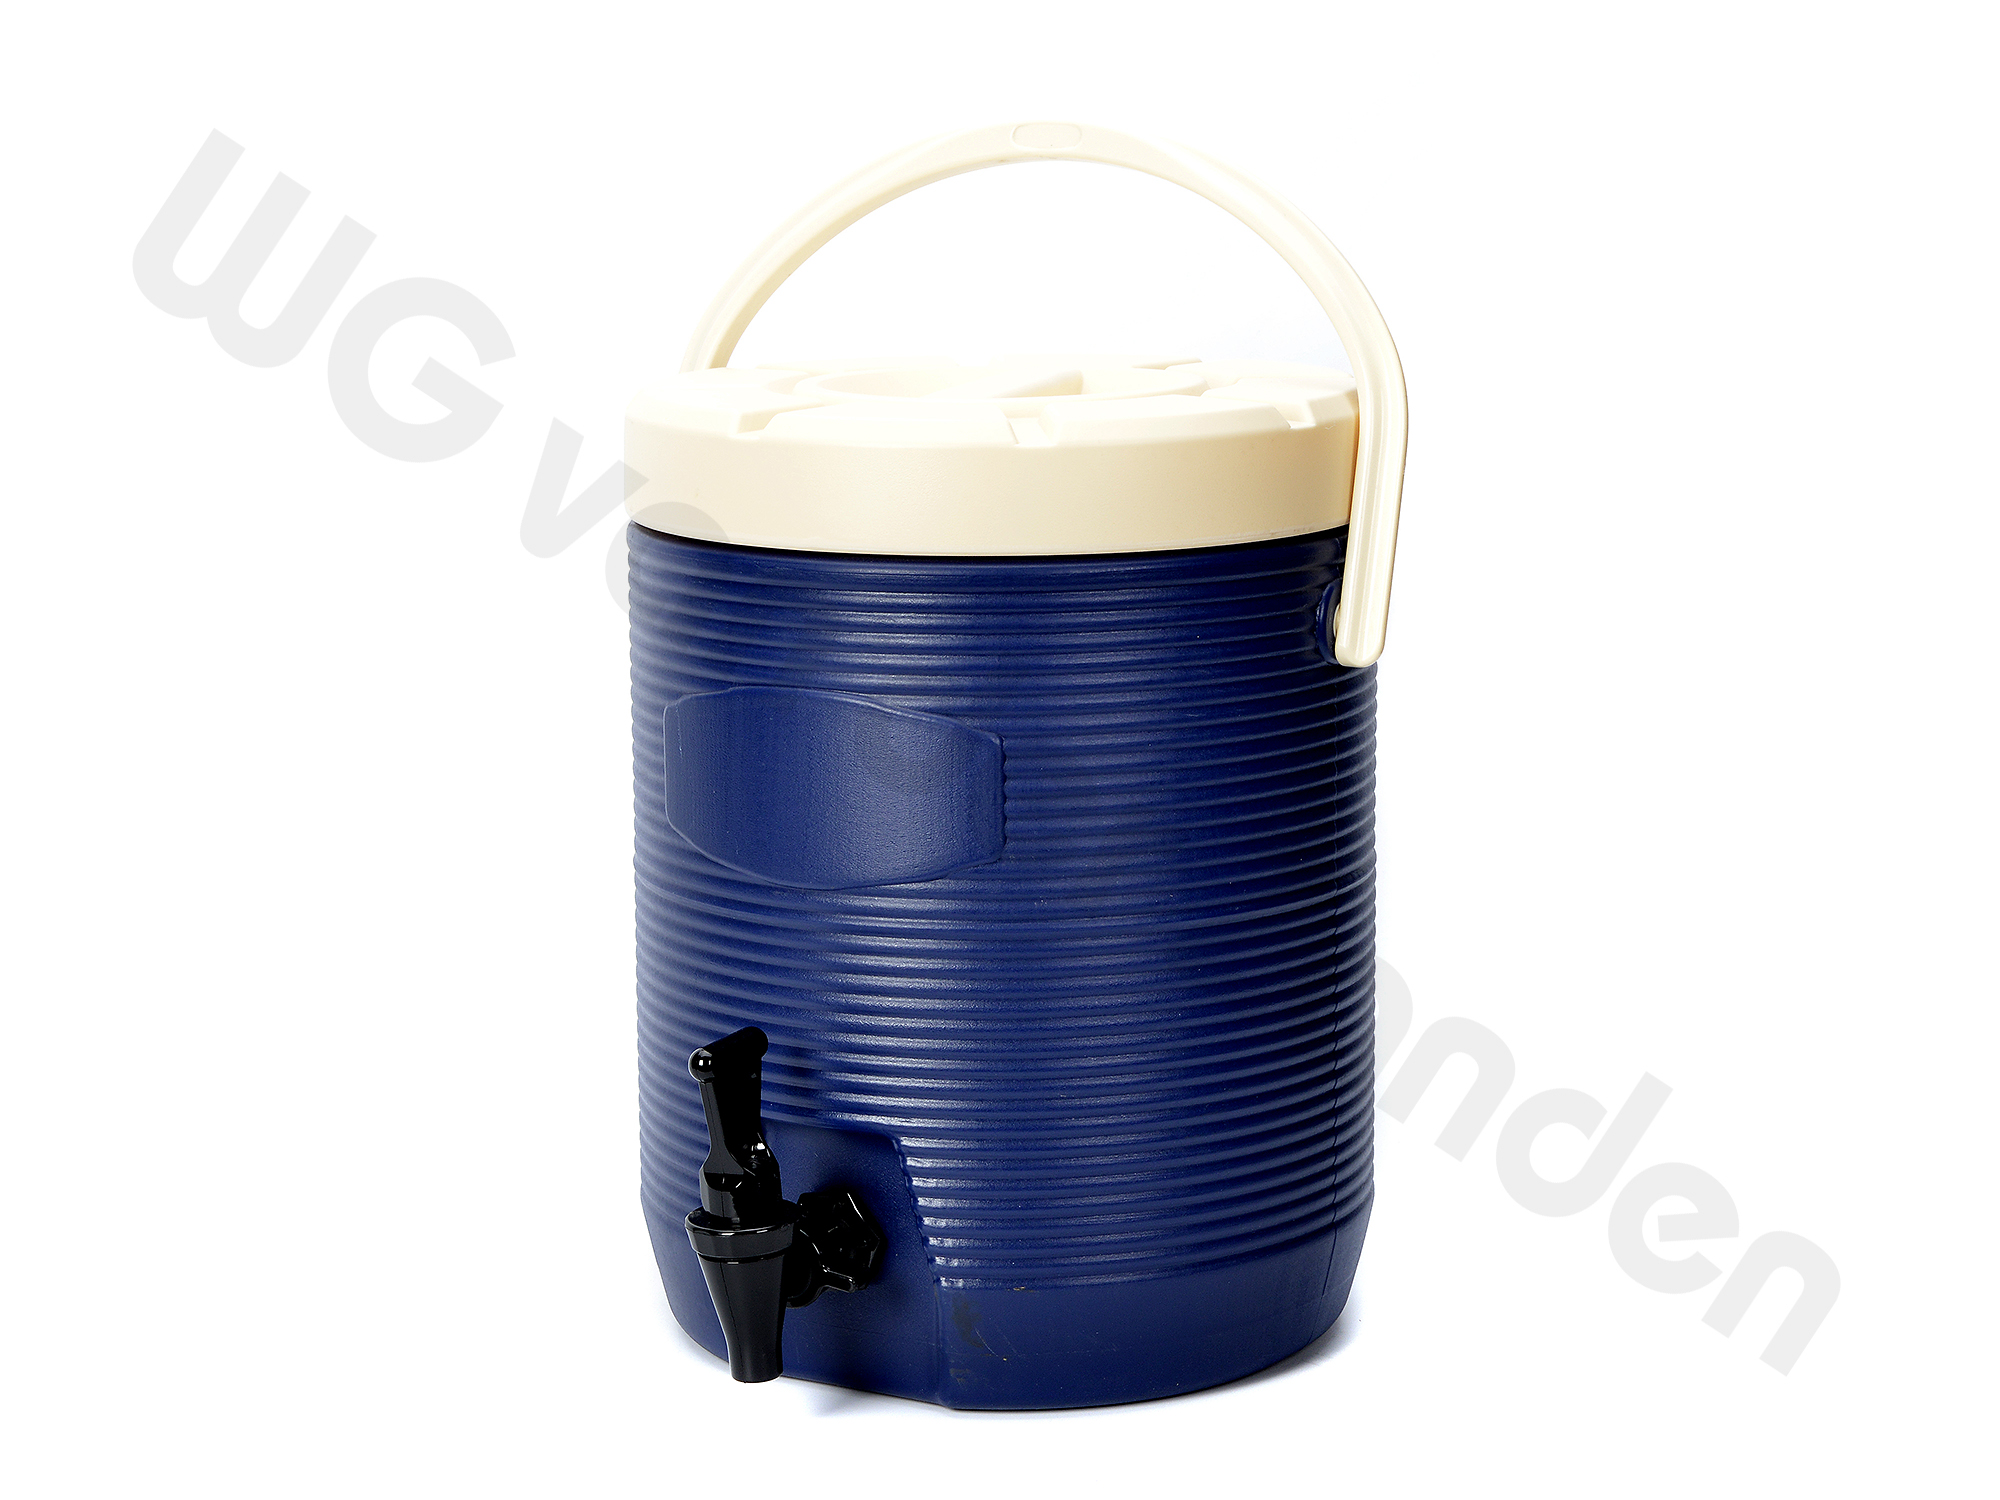 441850 THERMO WATER JUG / DISPENSER 14LTR WITH TAP